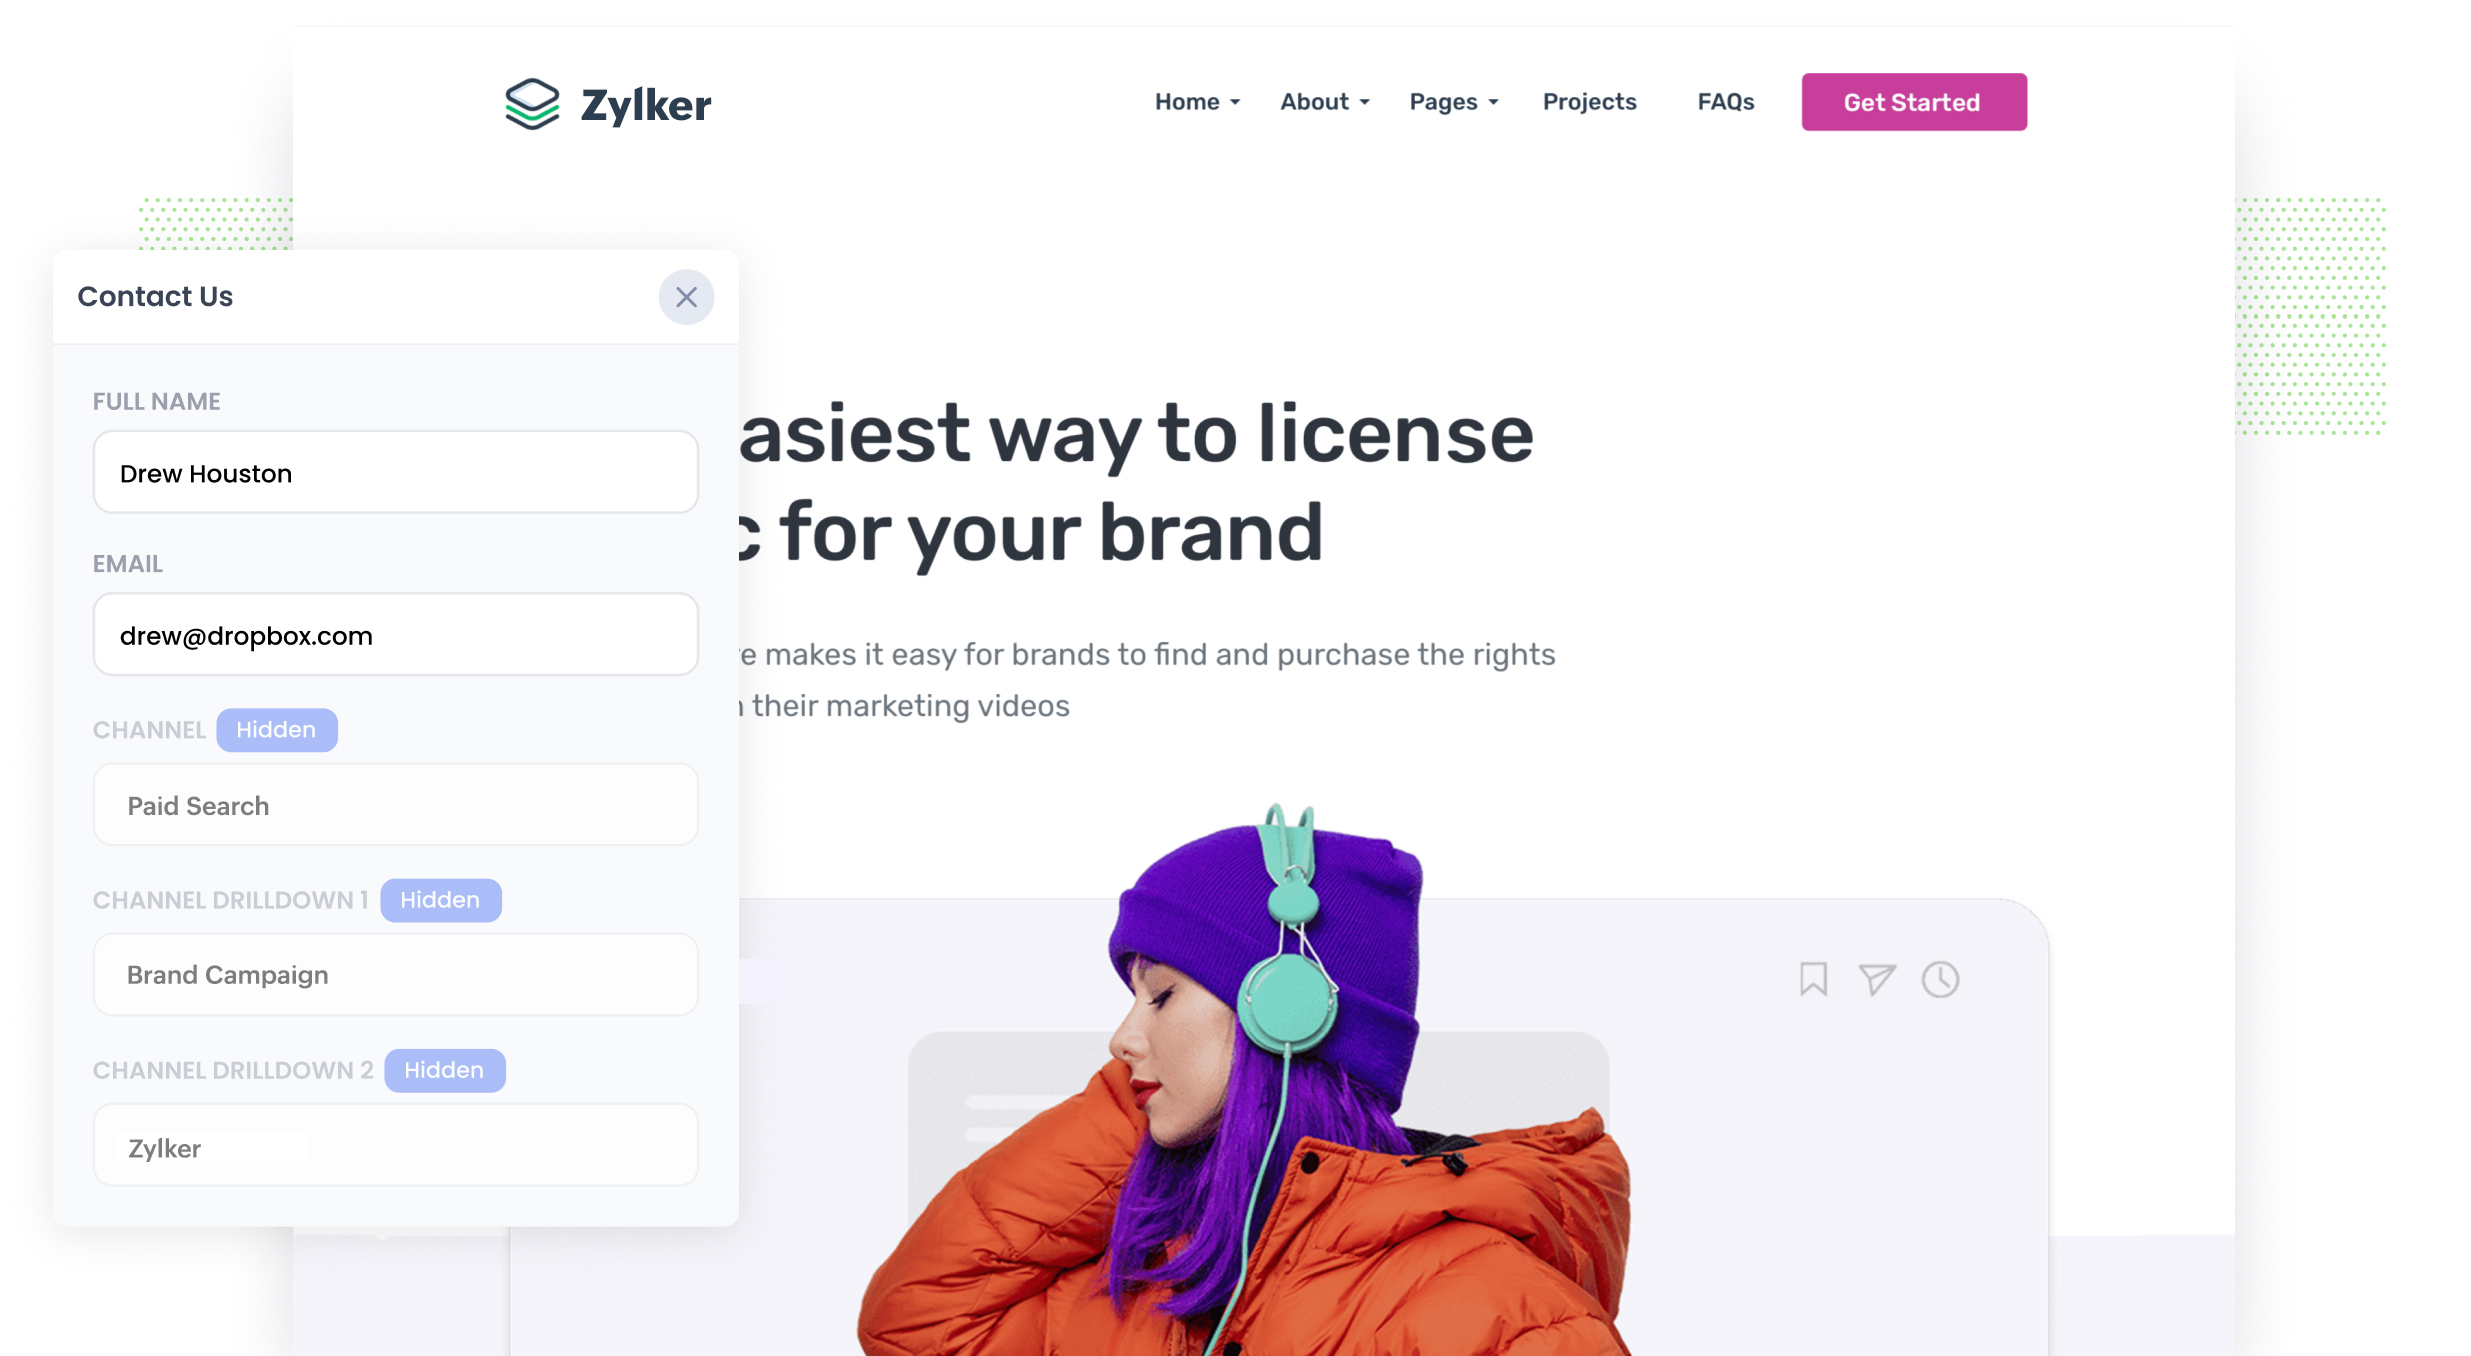 "Screenshot of the Zylker website along with a contact form"